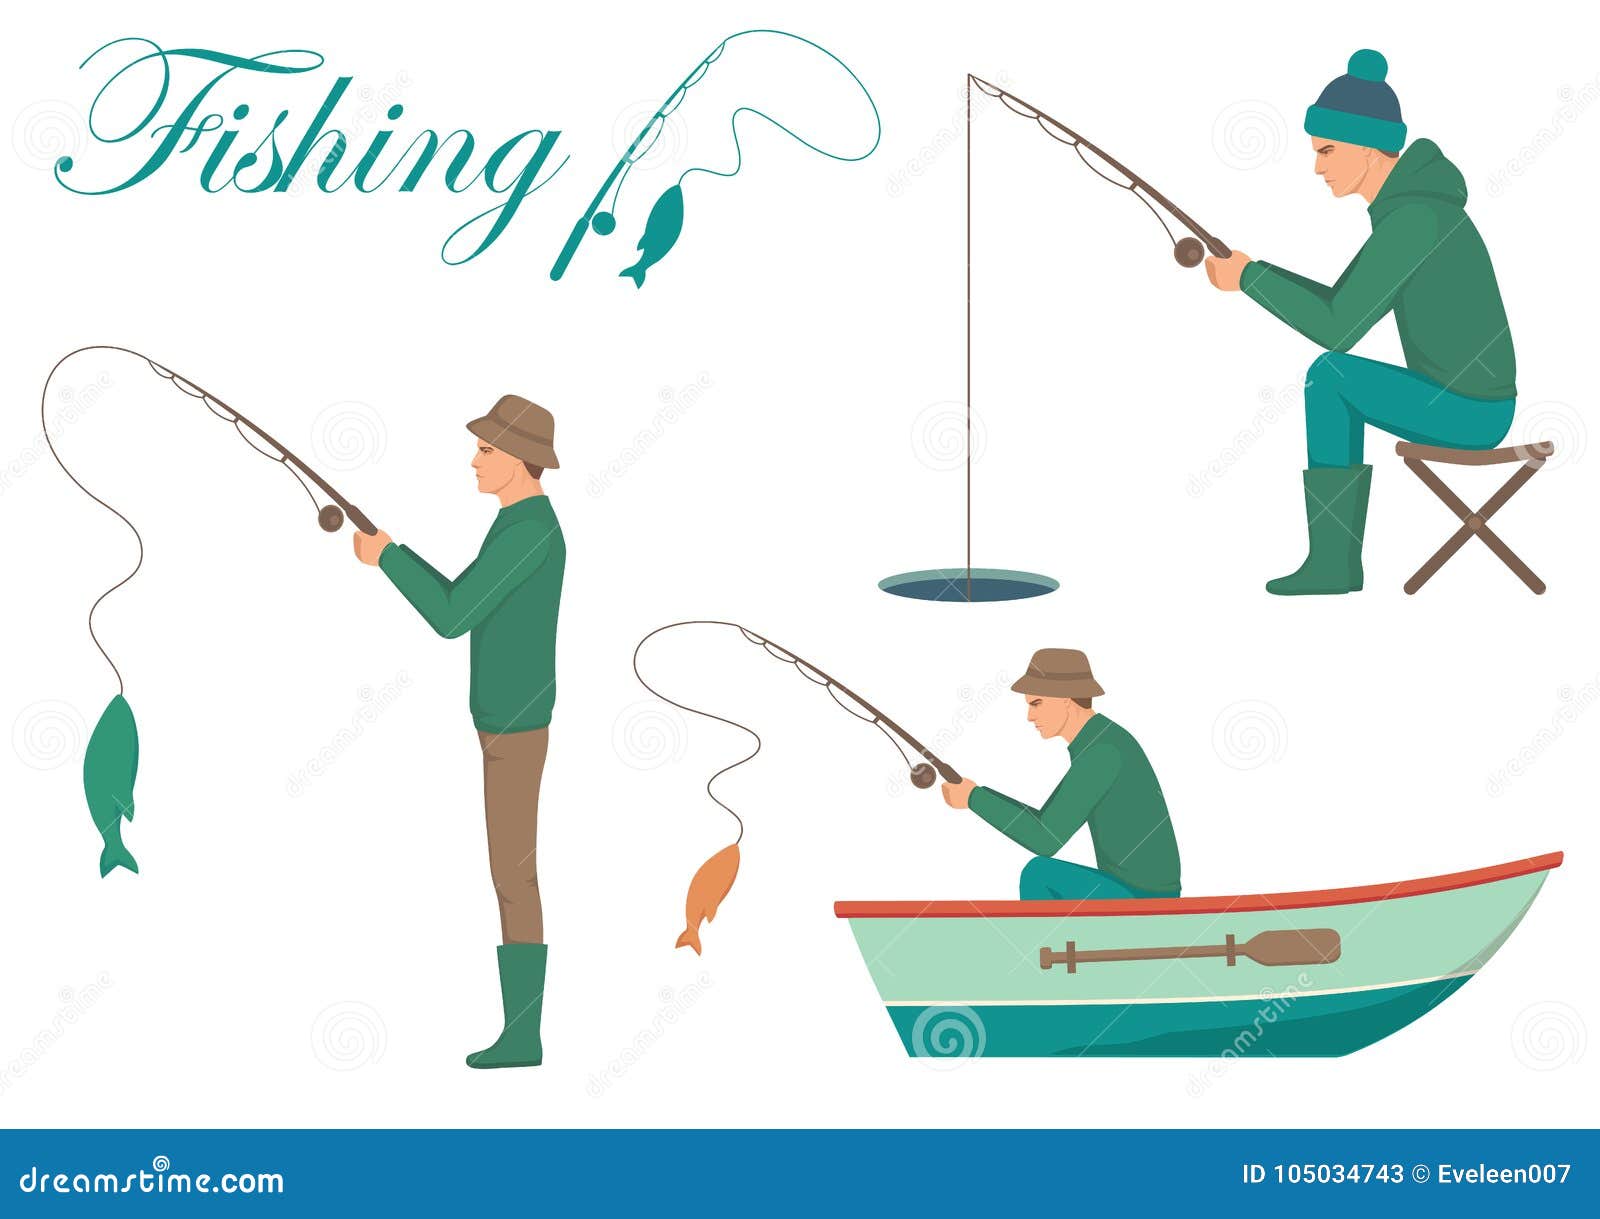 19,573 Cartoon Fishing Rod Royalty-Free Photos and Stock Images